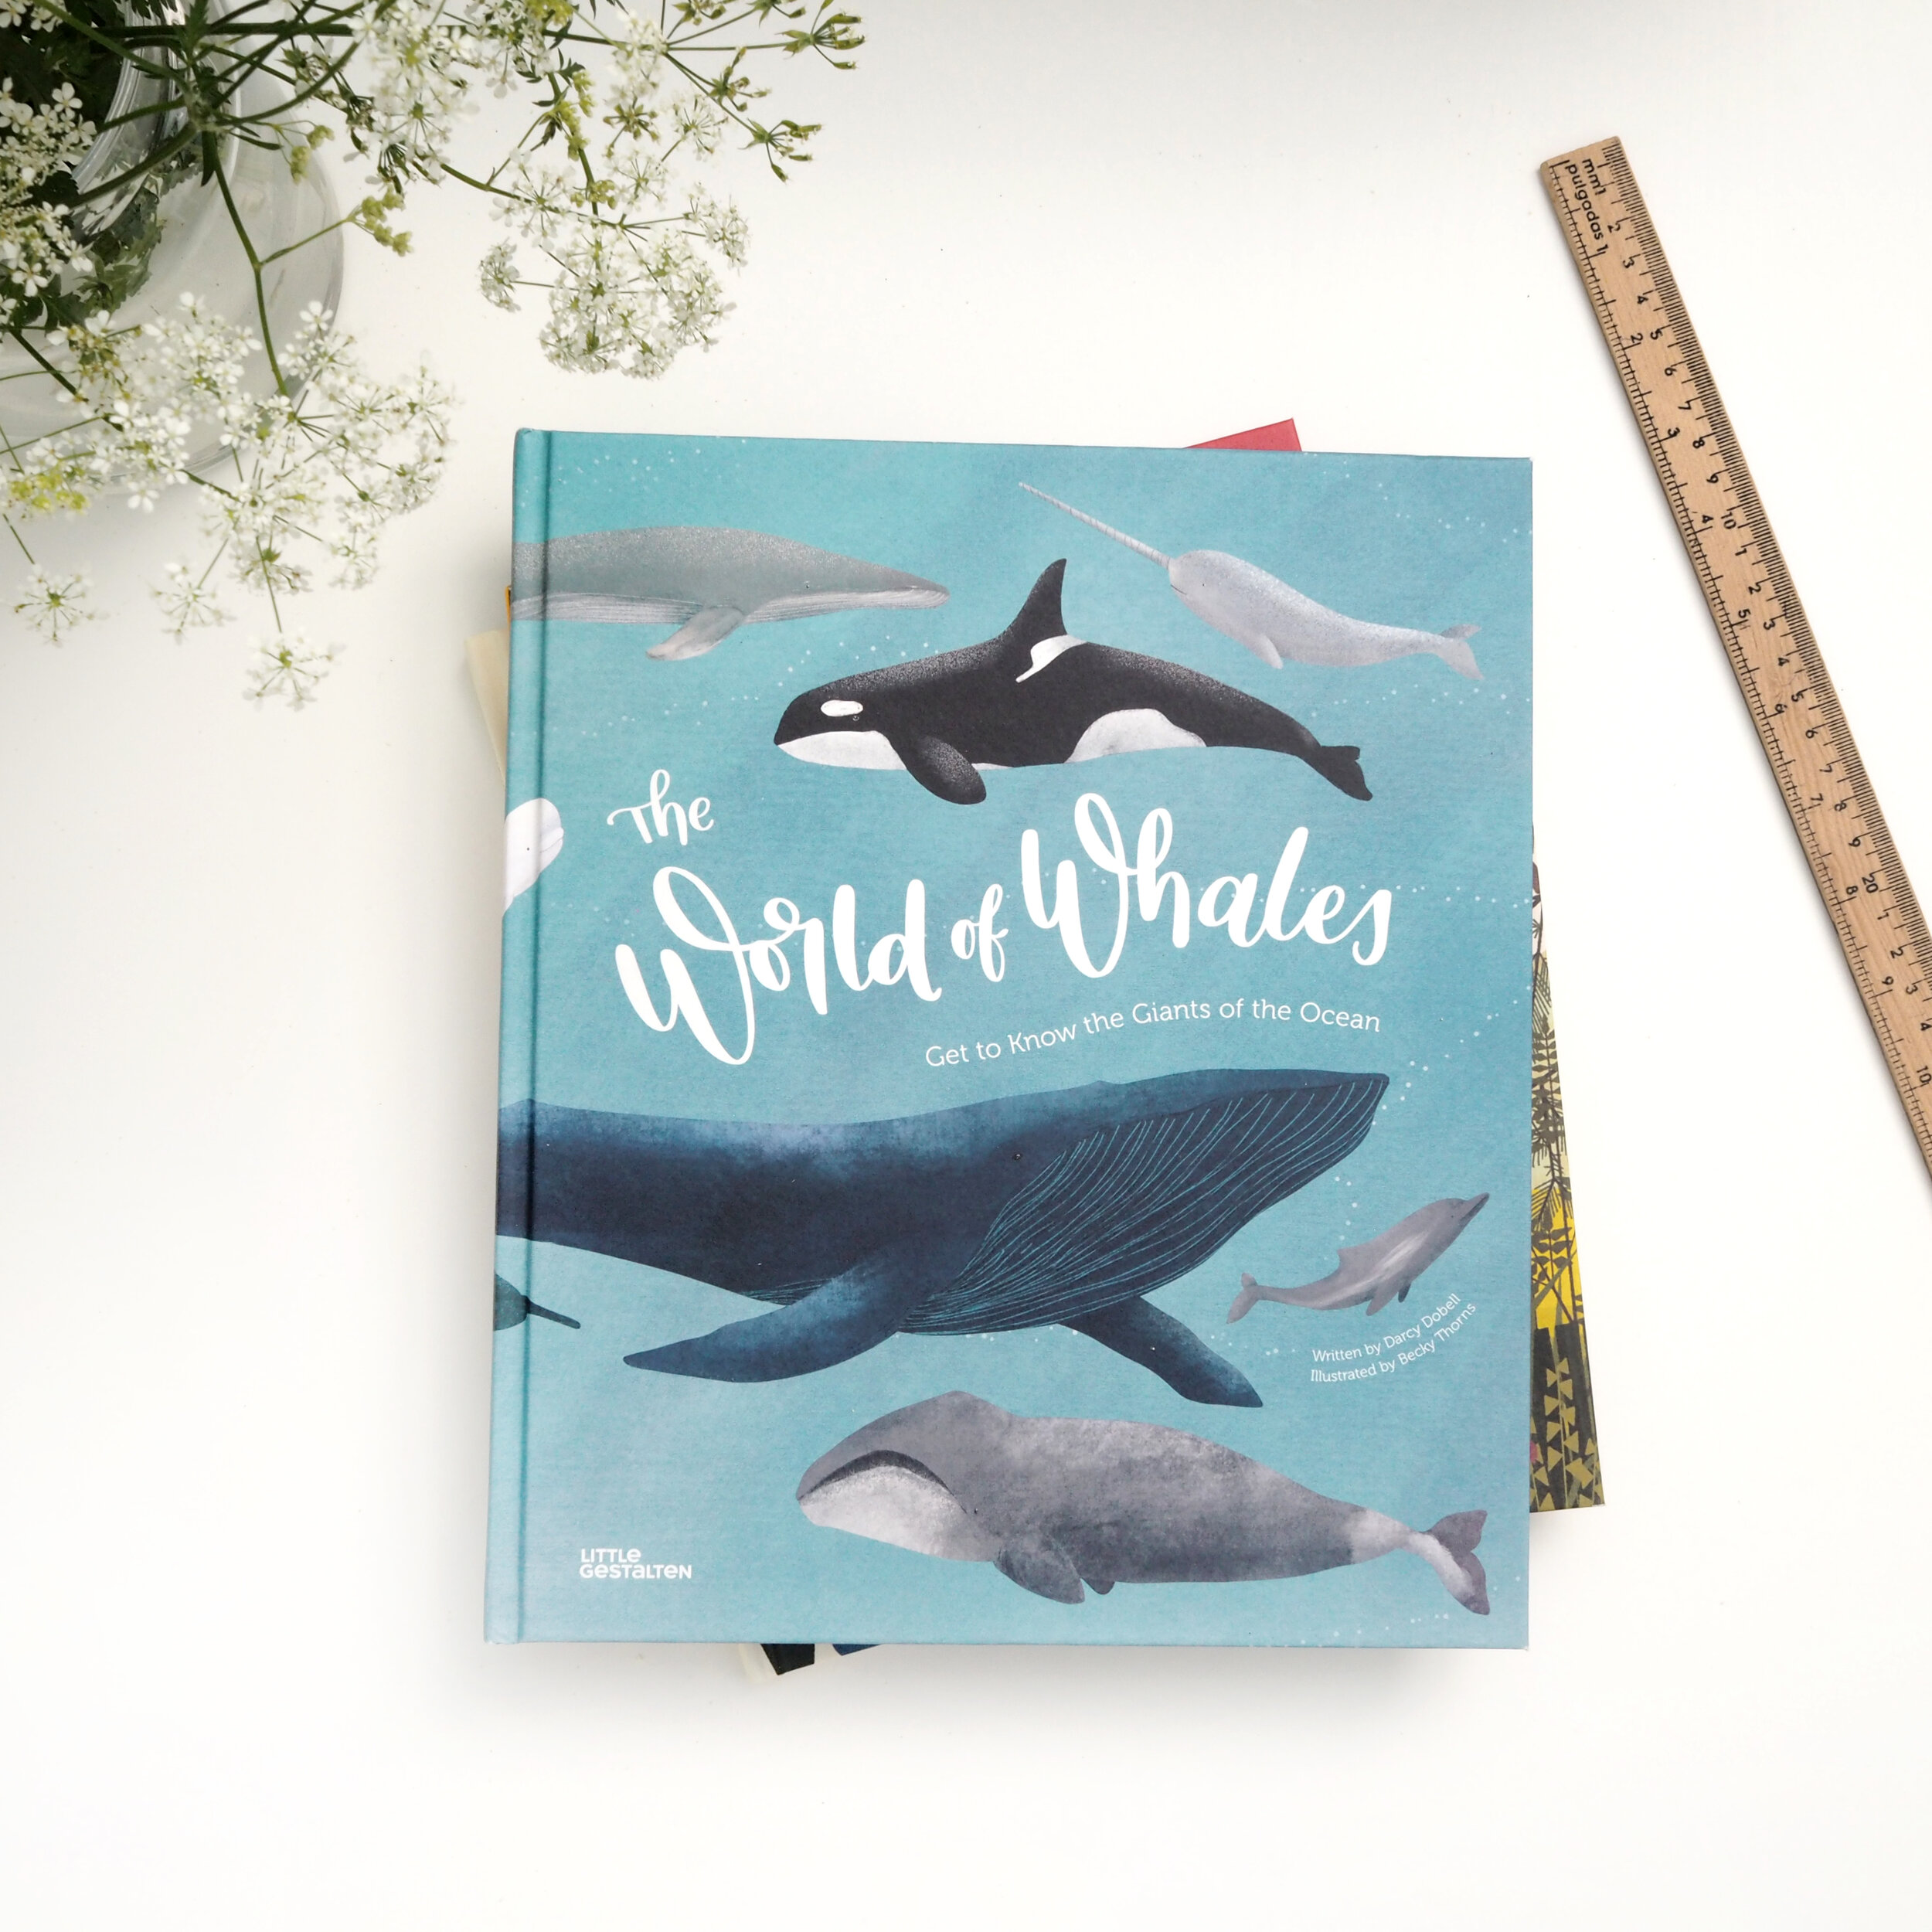 The World of Whales book